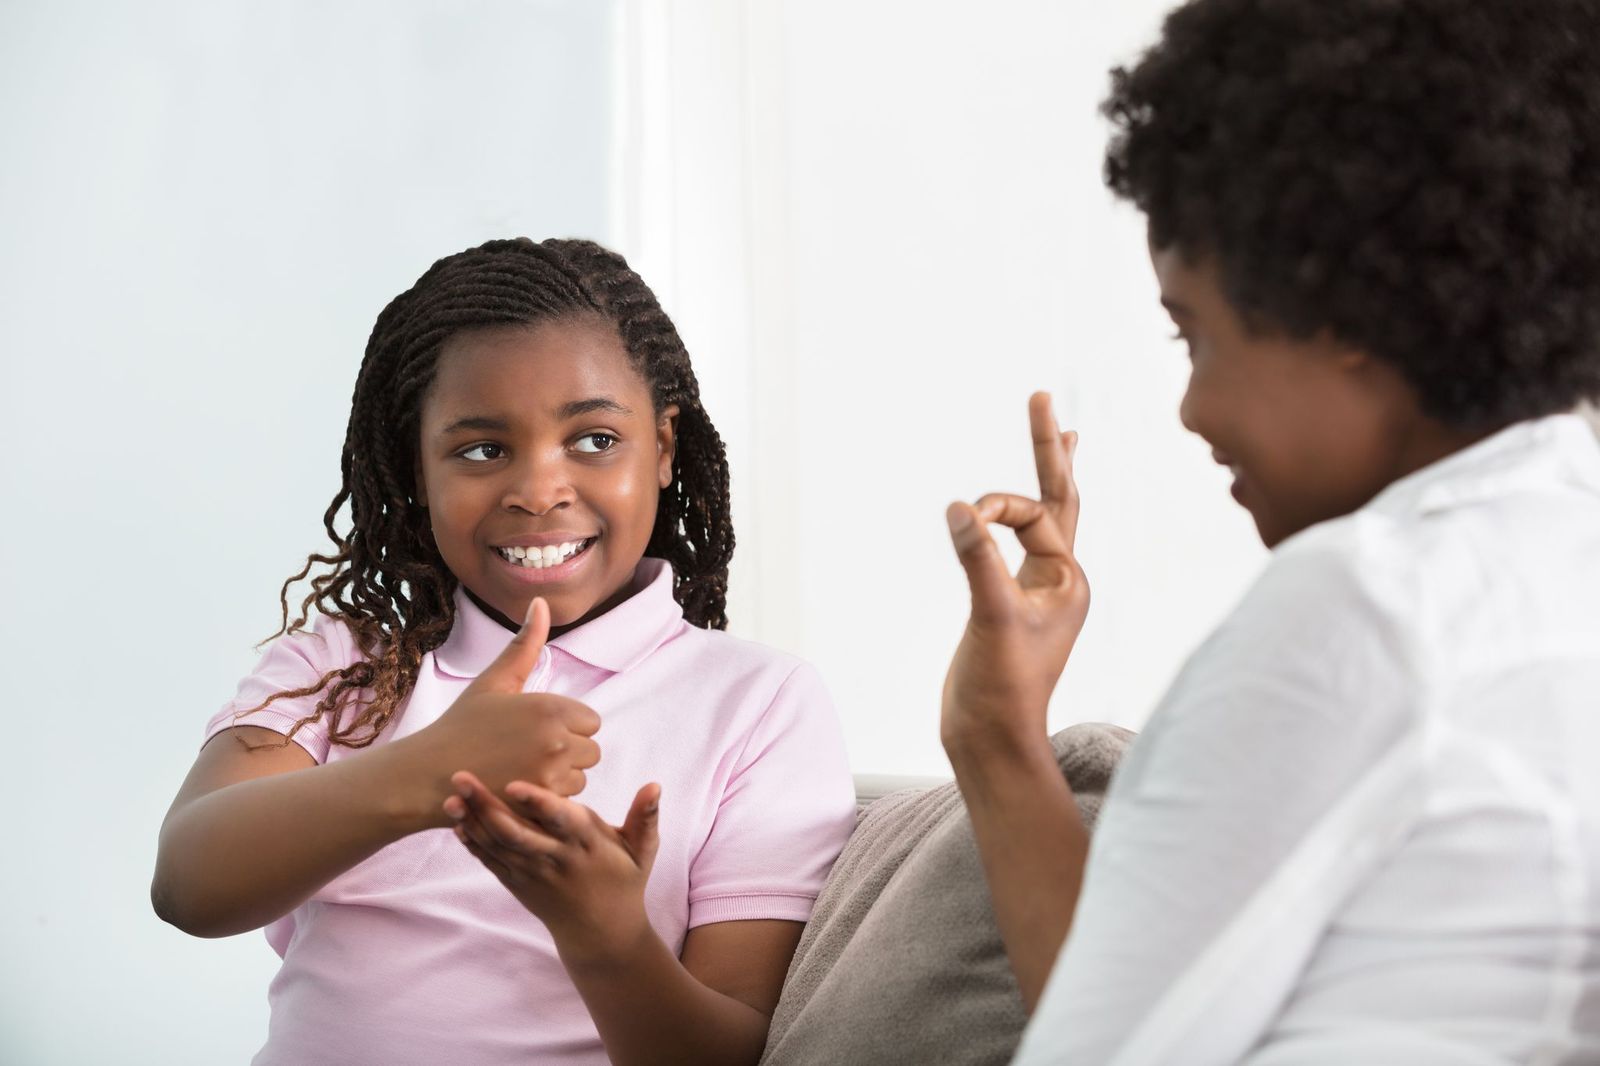 A girl practices ASL with a woman